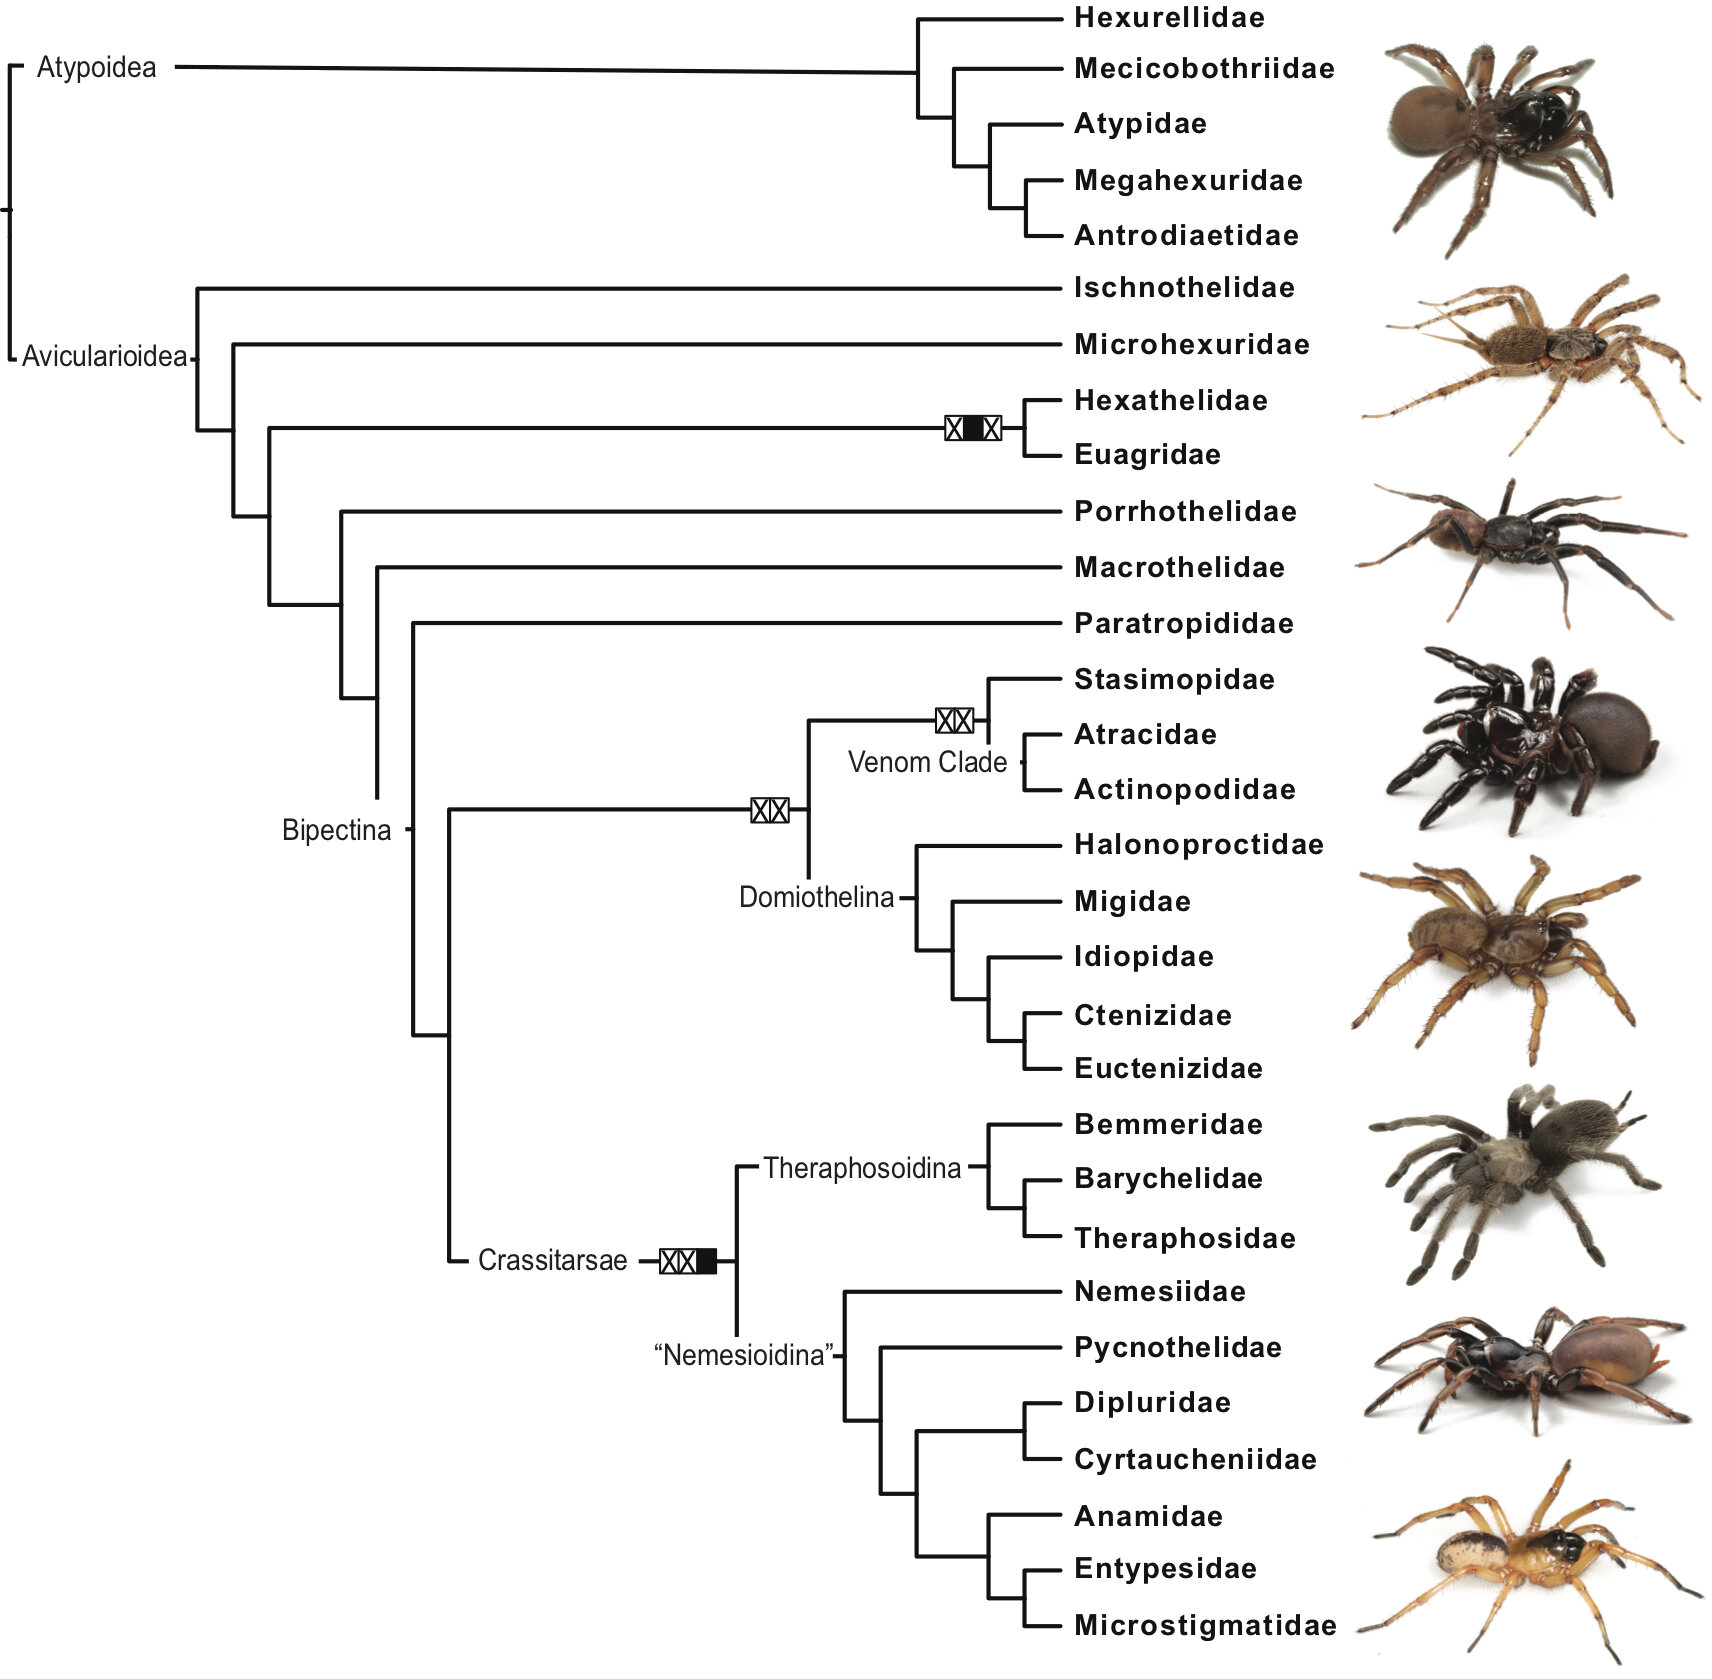 Phylogenetic systematics and evolution of the spider infraorder Mygalomorphae using genomic scale data